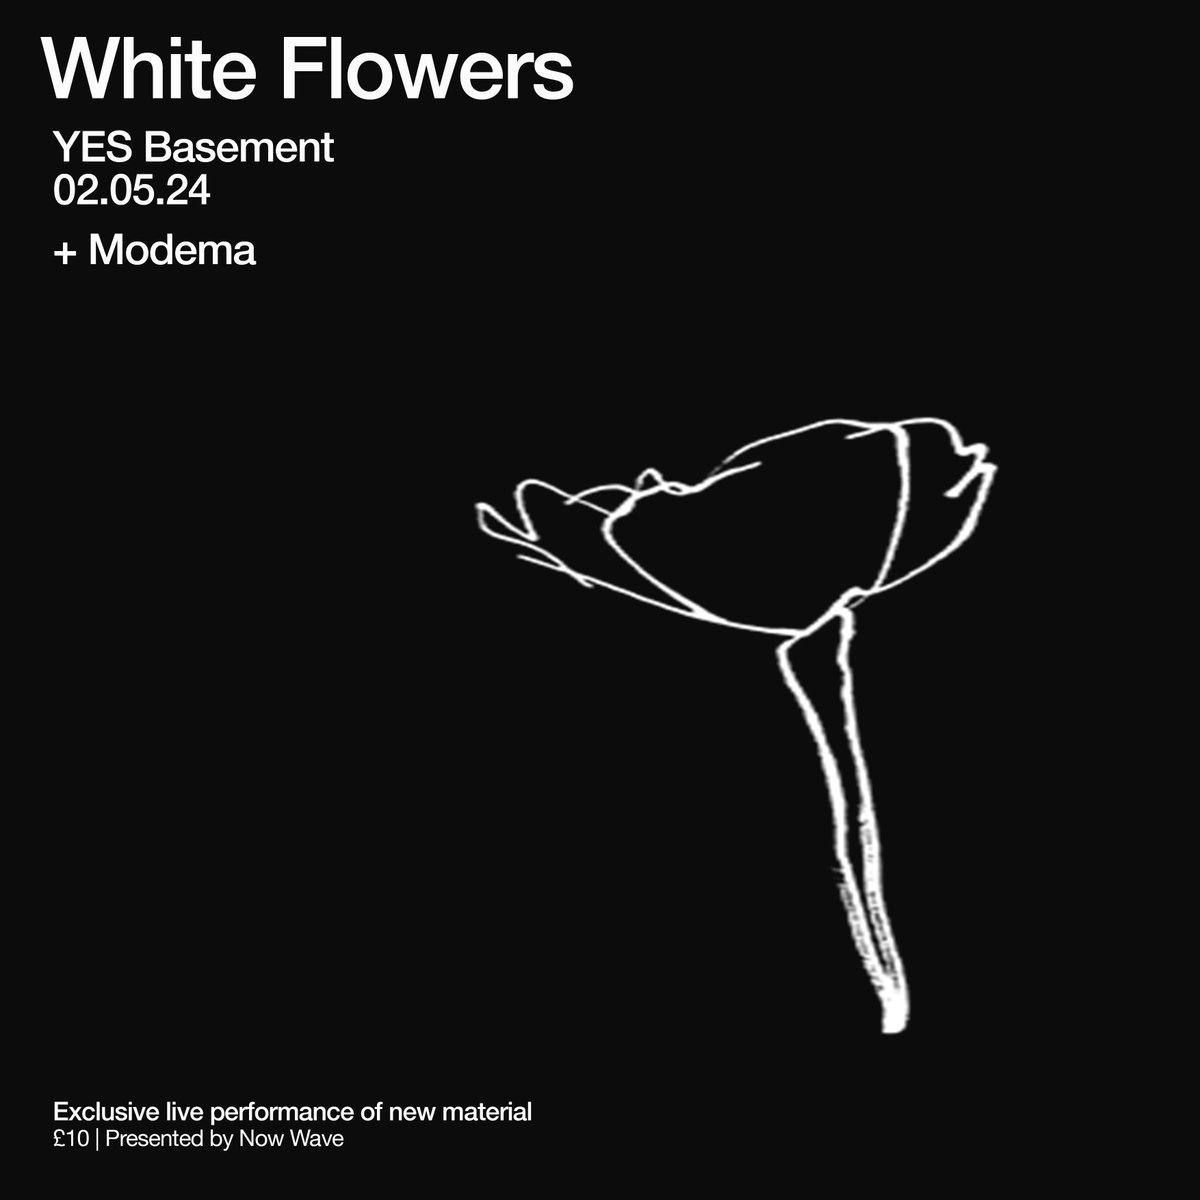 THIS THURSDAY... @wwwhiteflowers return showcasing a new audio / visual performance at YES Basement. Support comes from Modema. Final tickets available here -> seetickets.com/event/white-fl…